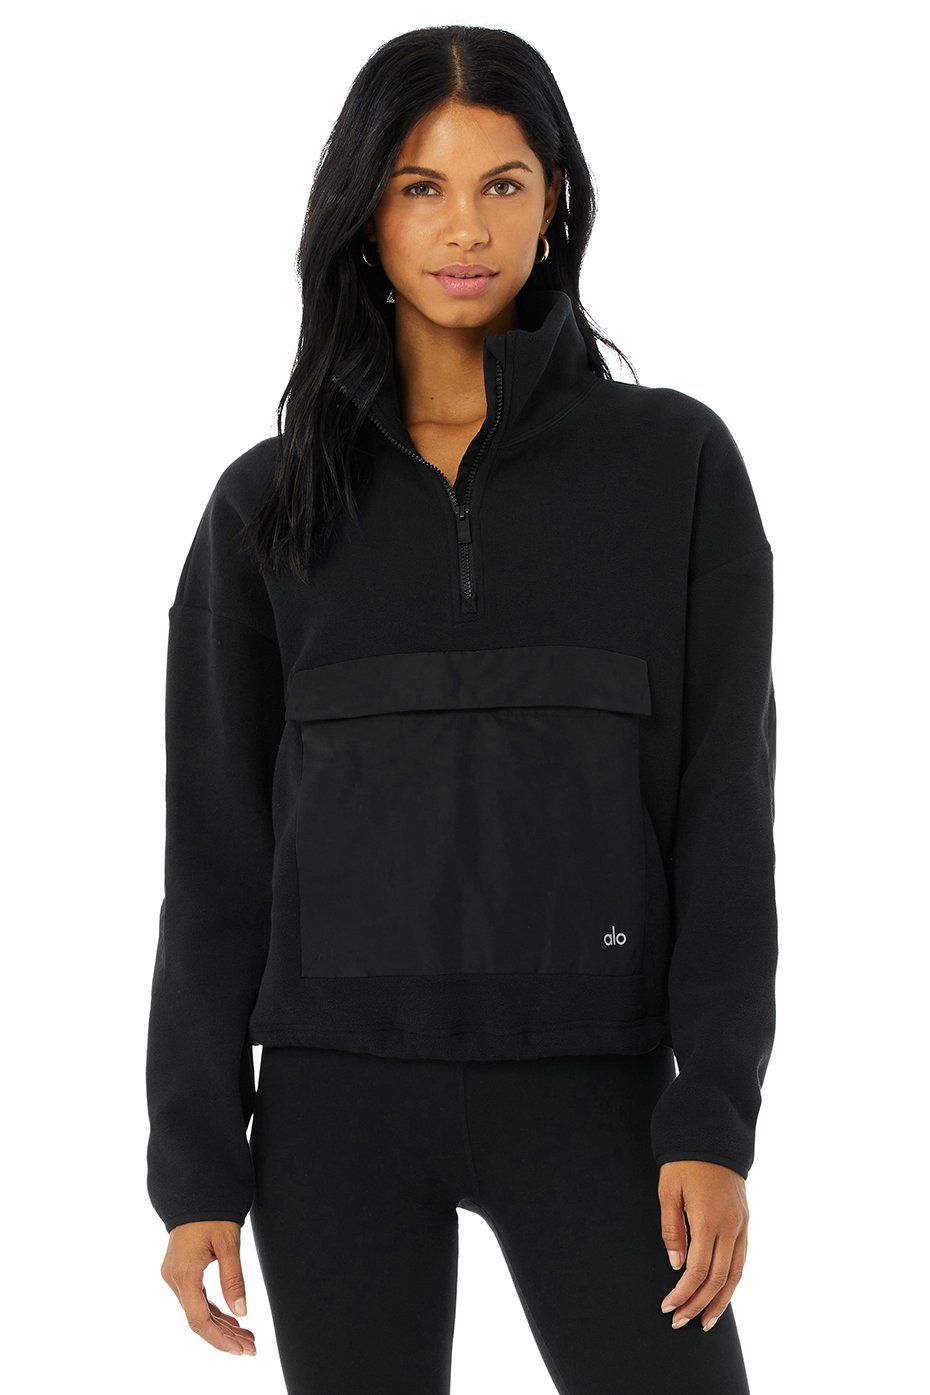 Alo Yoga Women's Sway Jacket, Black, Extra Small : Buy Online at